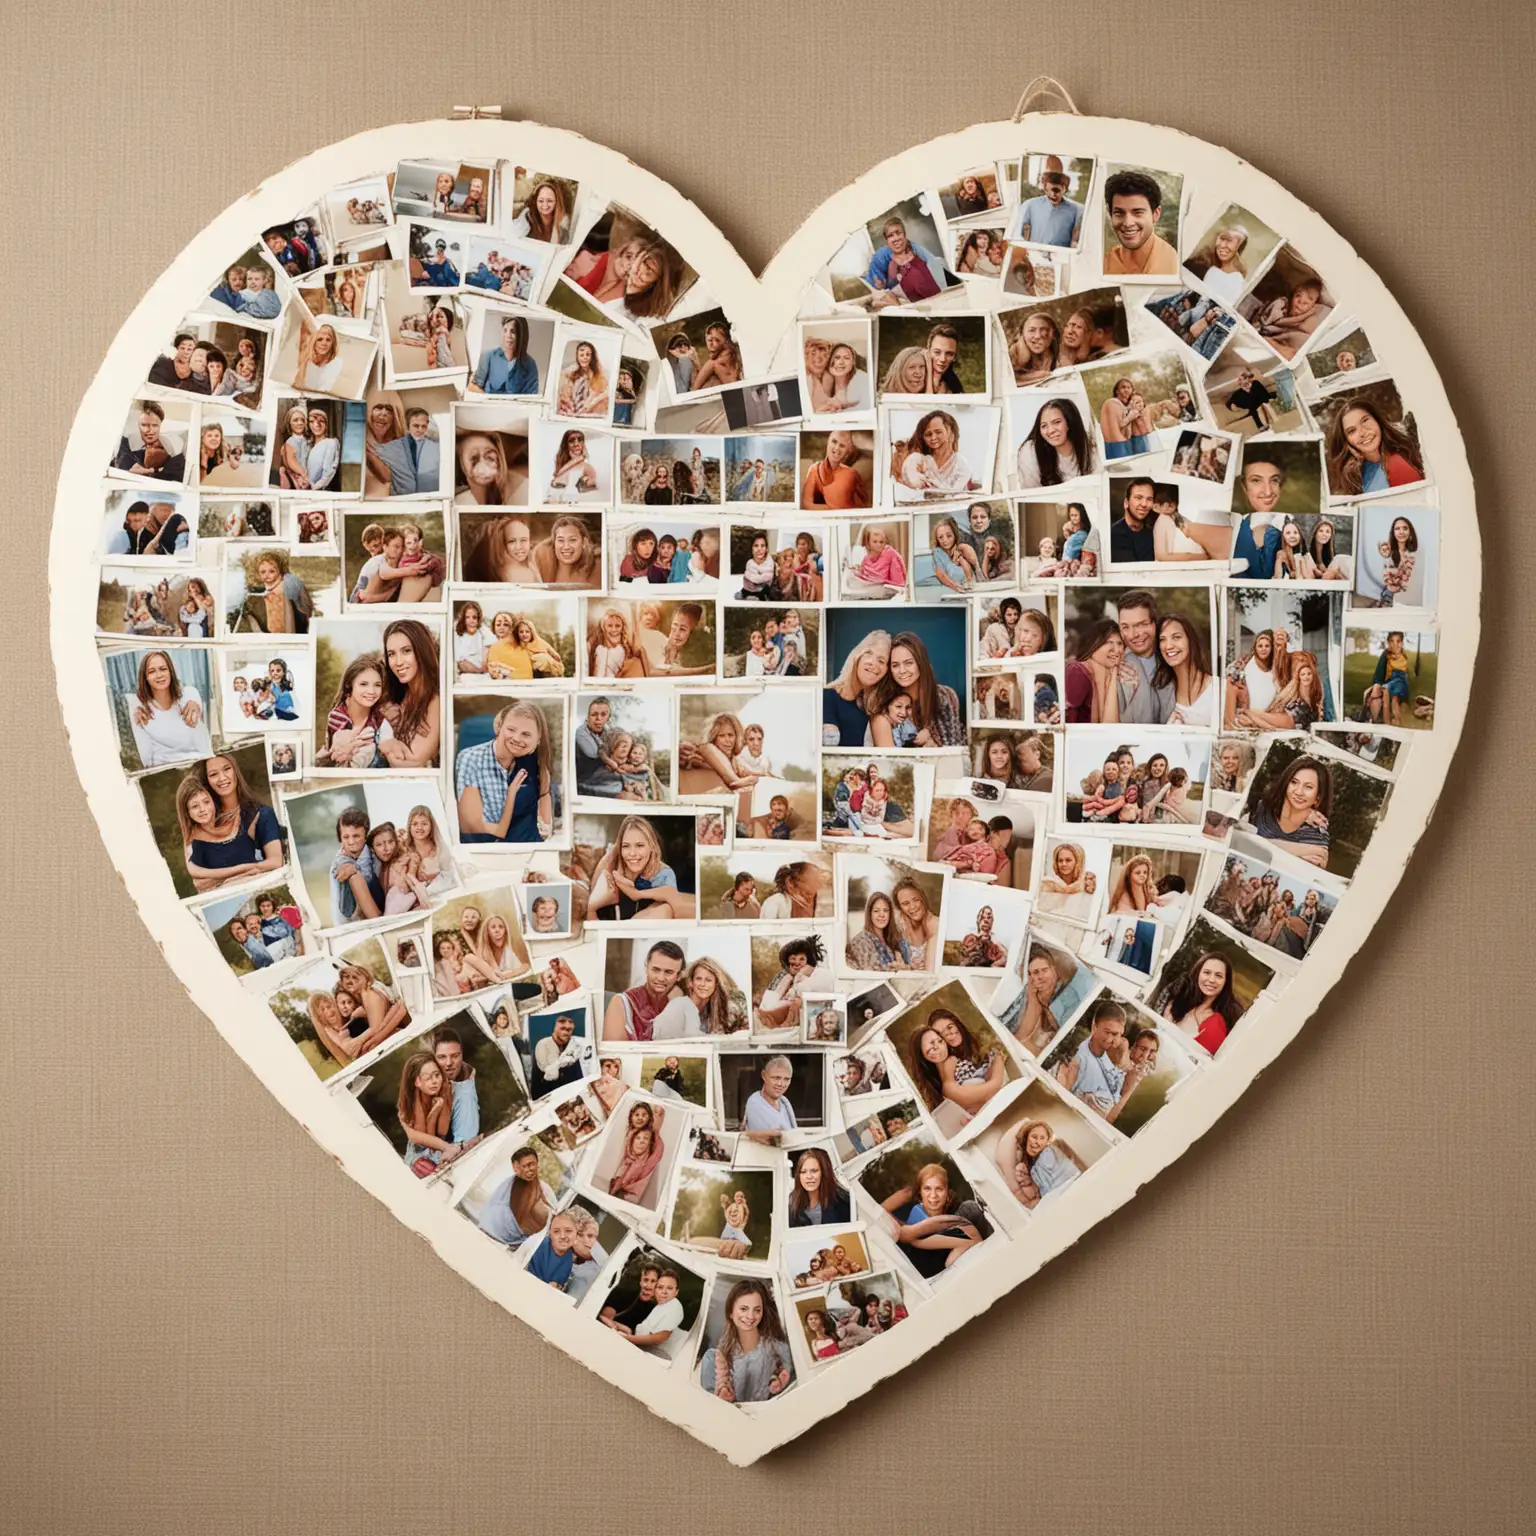 A collage of memorable family photos arranged in a heart shape or a grid layout, showcasing cherished moments and memories shared with Mom.